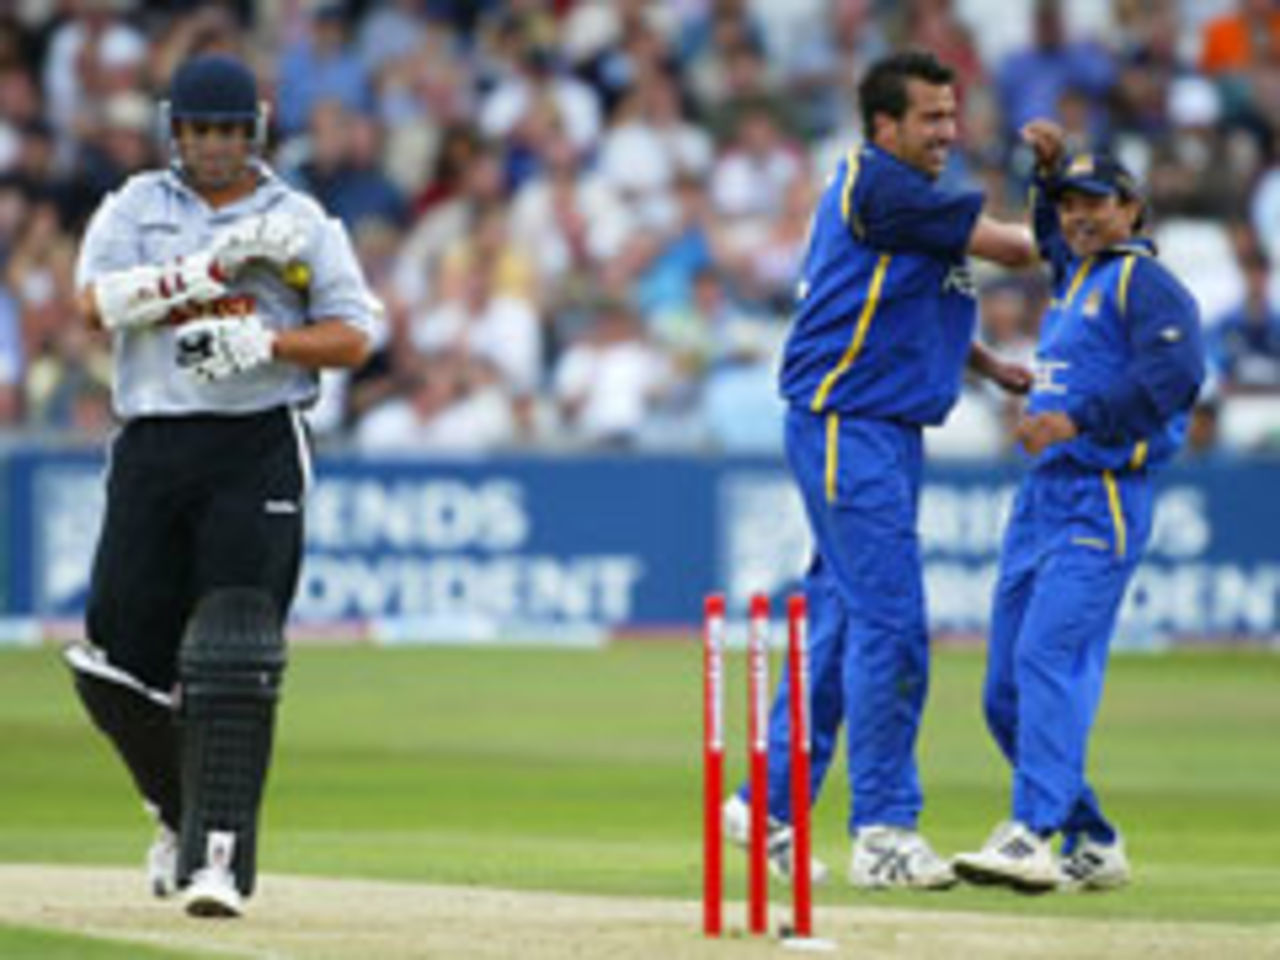 Jimmy Ormond celebrates the wicket of Neil Carter in the final of the Twenty20 Cup at Trent Bridge